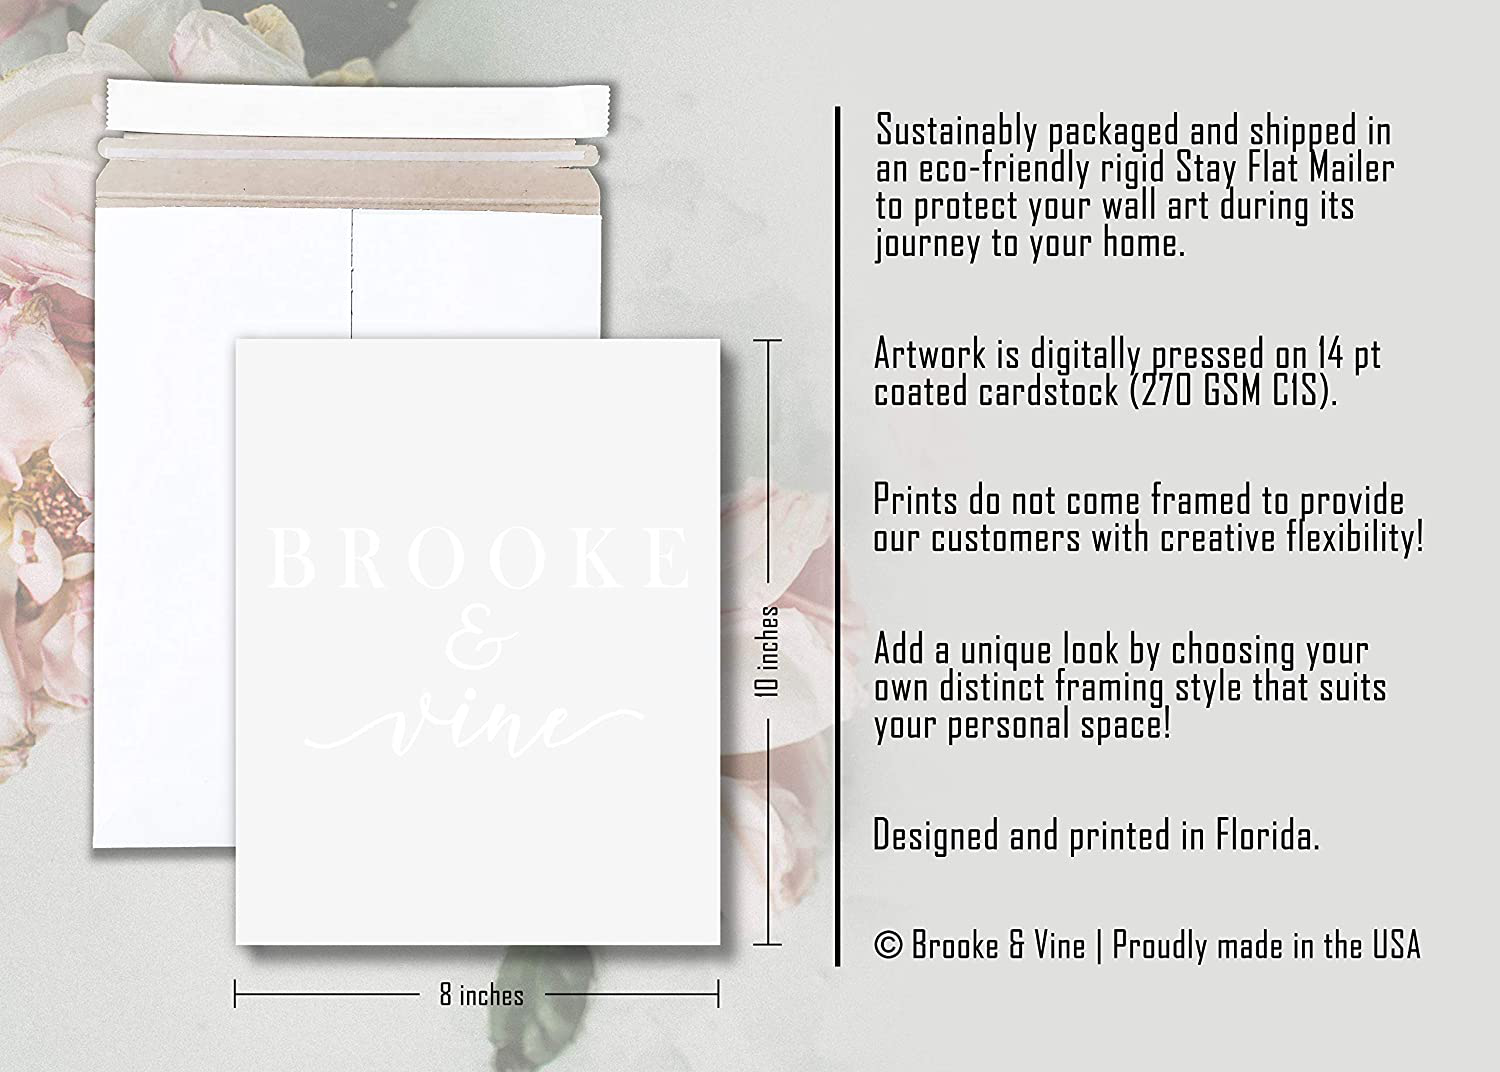 Brooke & Vine Girl Room Wall Decor Art Prints - (UNFRAMED 8 x 10) Inspirational Wall Art, Motivational Quotes Posters for Kids, Tween Bedroom, (Braver Than You Believe - Gold and Rainbow)